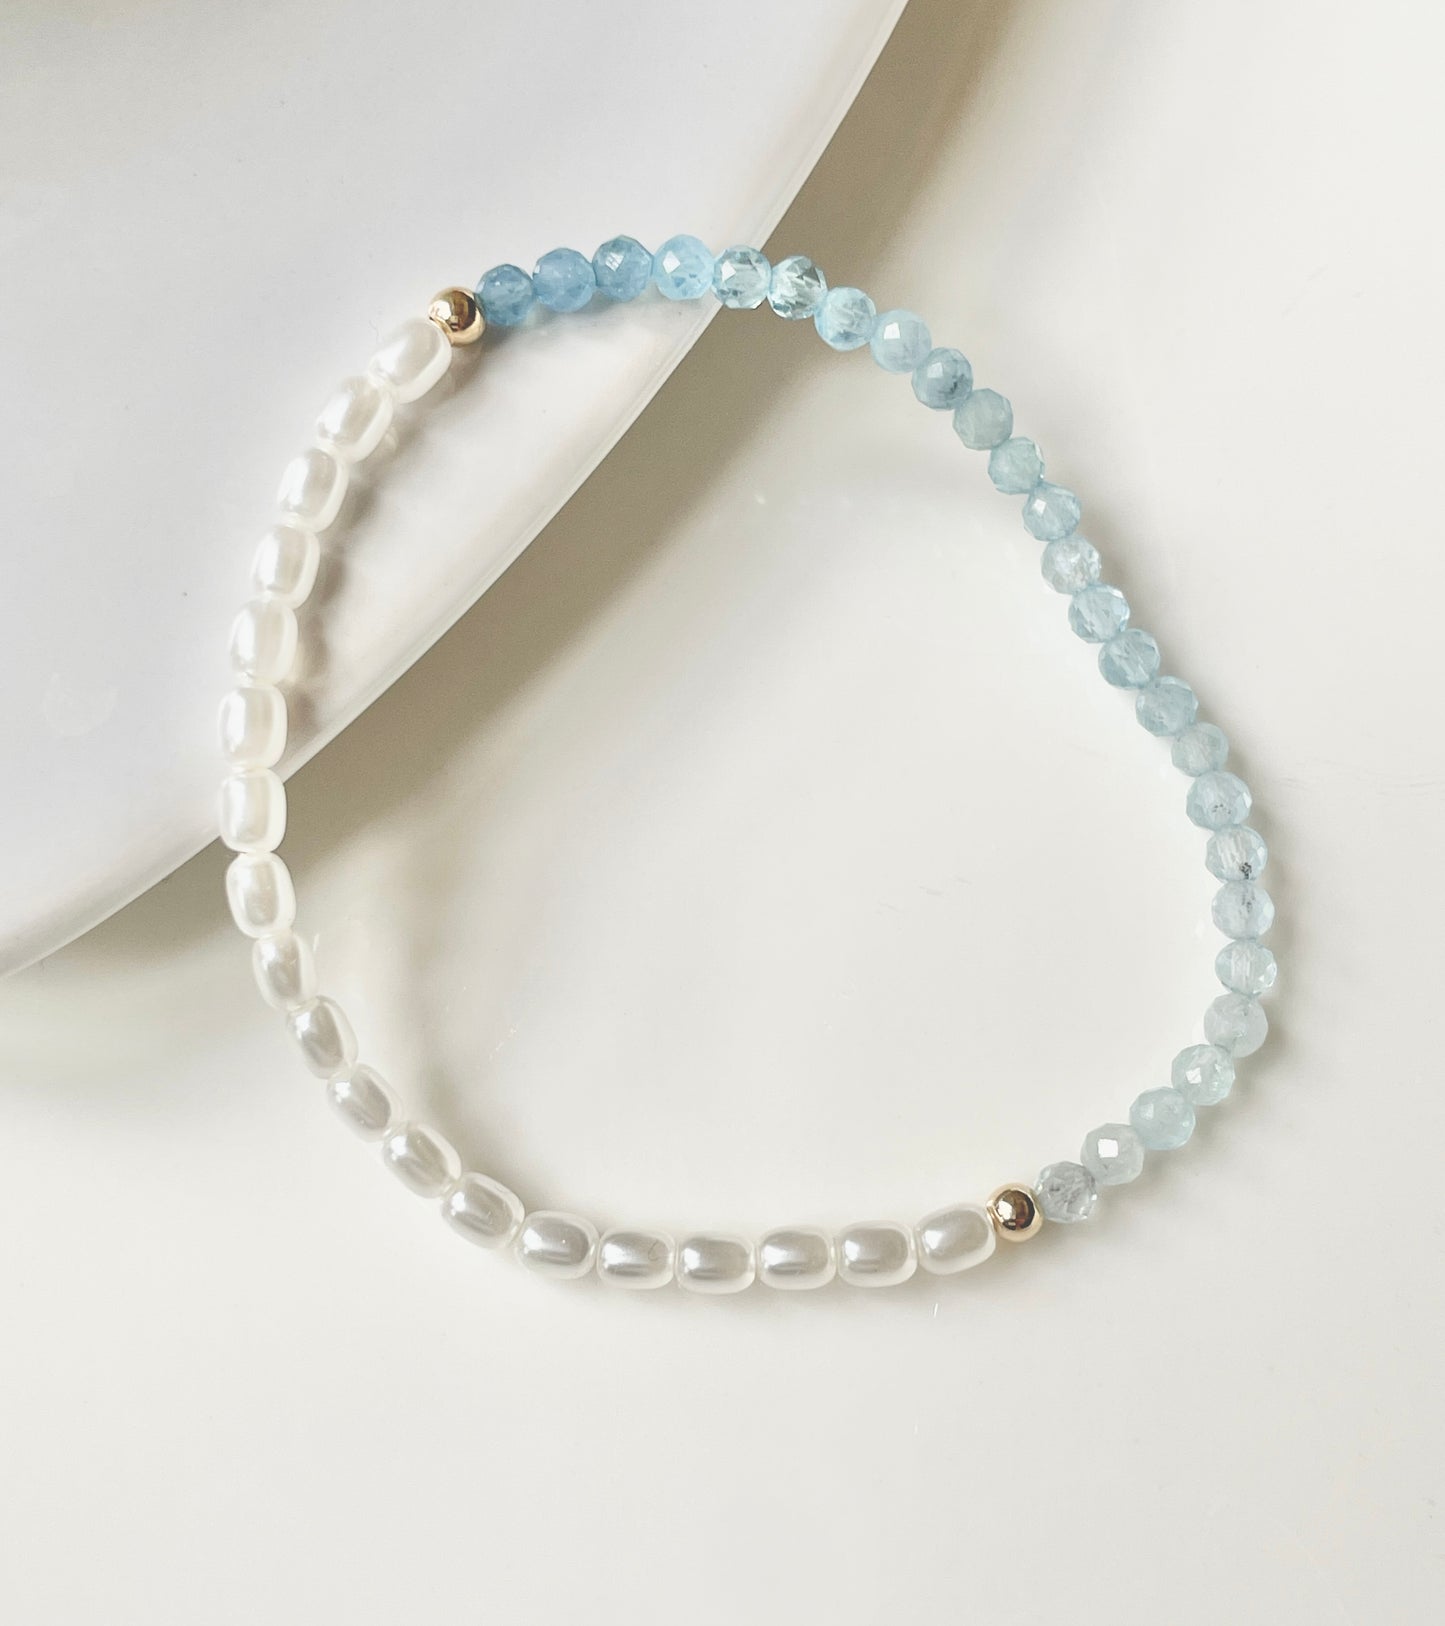 Dainty Mother of Pearl and Aquamarine Bracelet